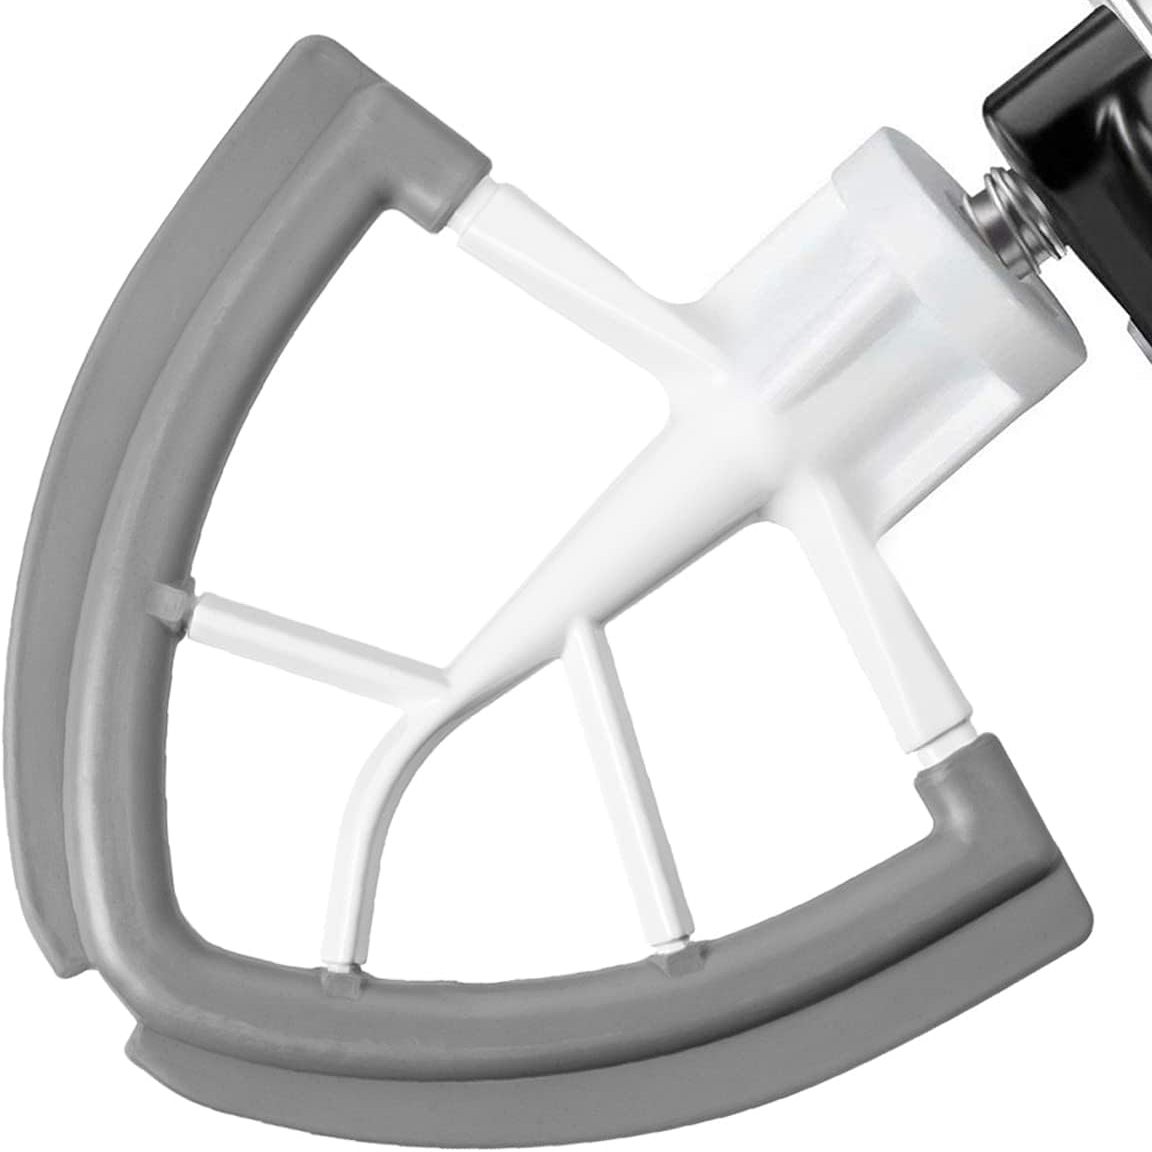 Generic iSH09-M494092mn 4.5/5 QT Flex Edge Beater for Kitchenaid Mixer,  Pouring Shield for Bowl-Lift Stand Mixer,Flat Paddle Beater Attachments  with Sc